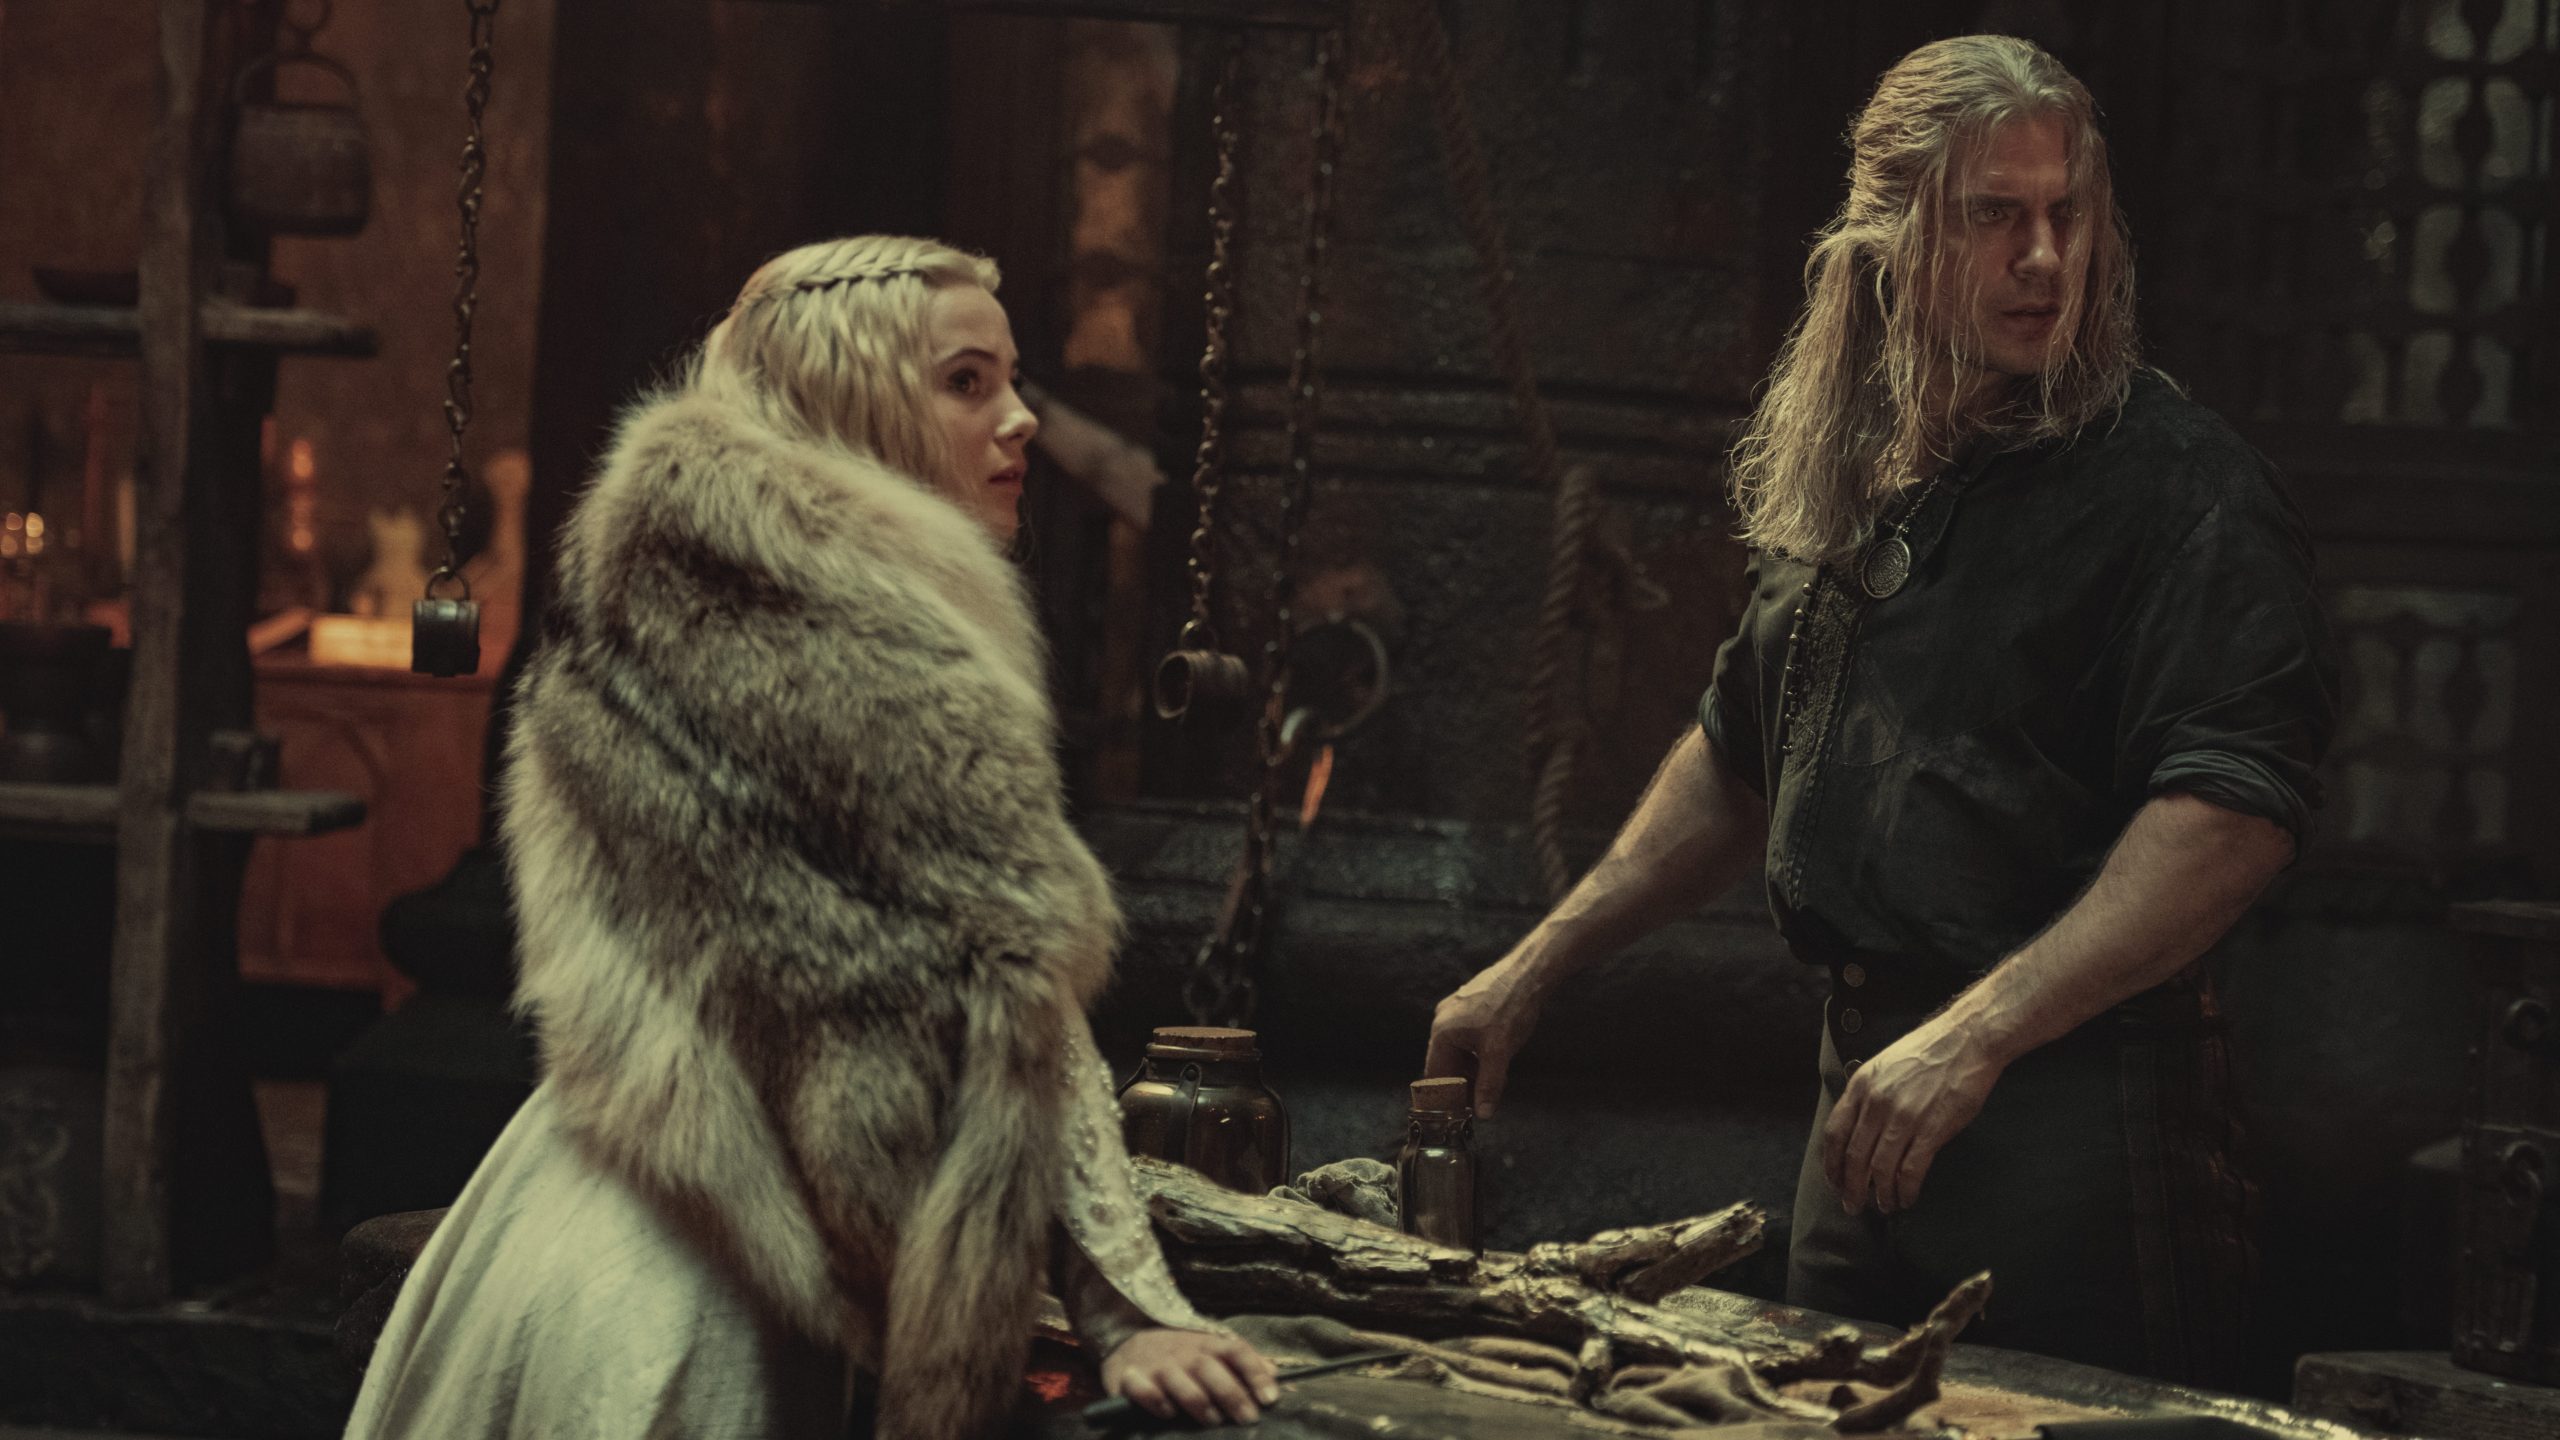 Freya Allan as Ciri wearing a white fur coat and Henry Cavill as Geralt stand together in shock as seen in season 2 of THE WITCHER on Netflix.